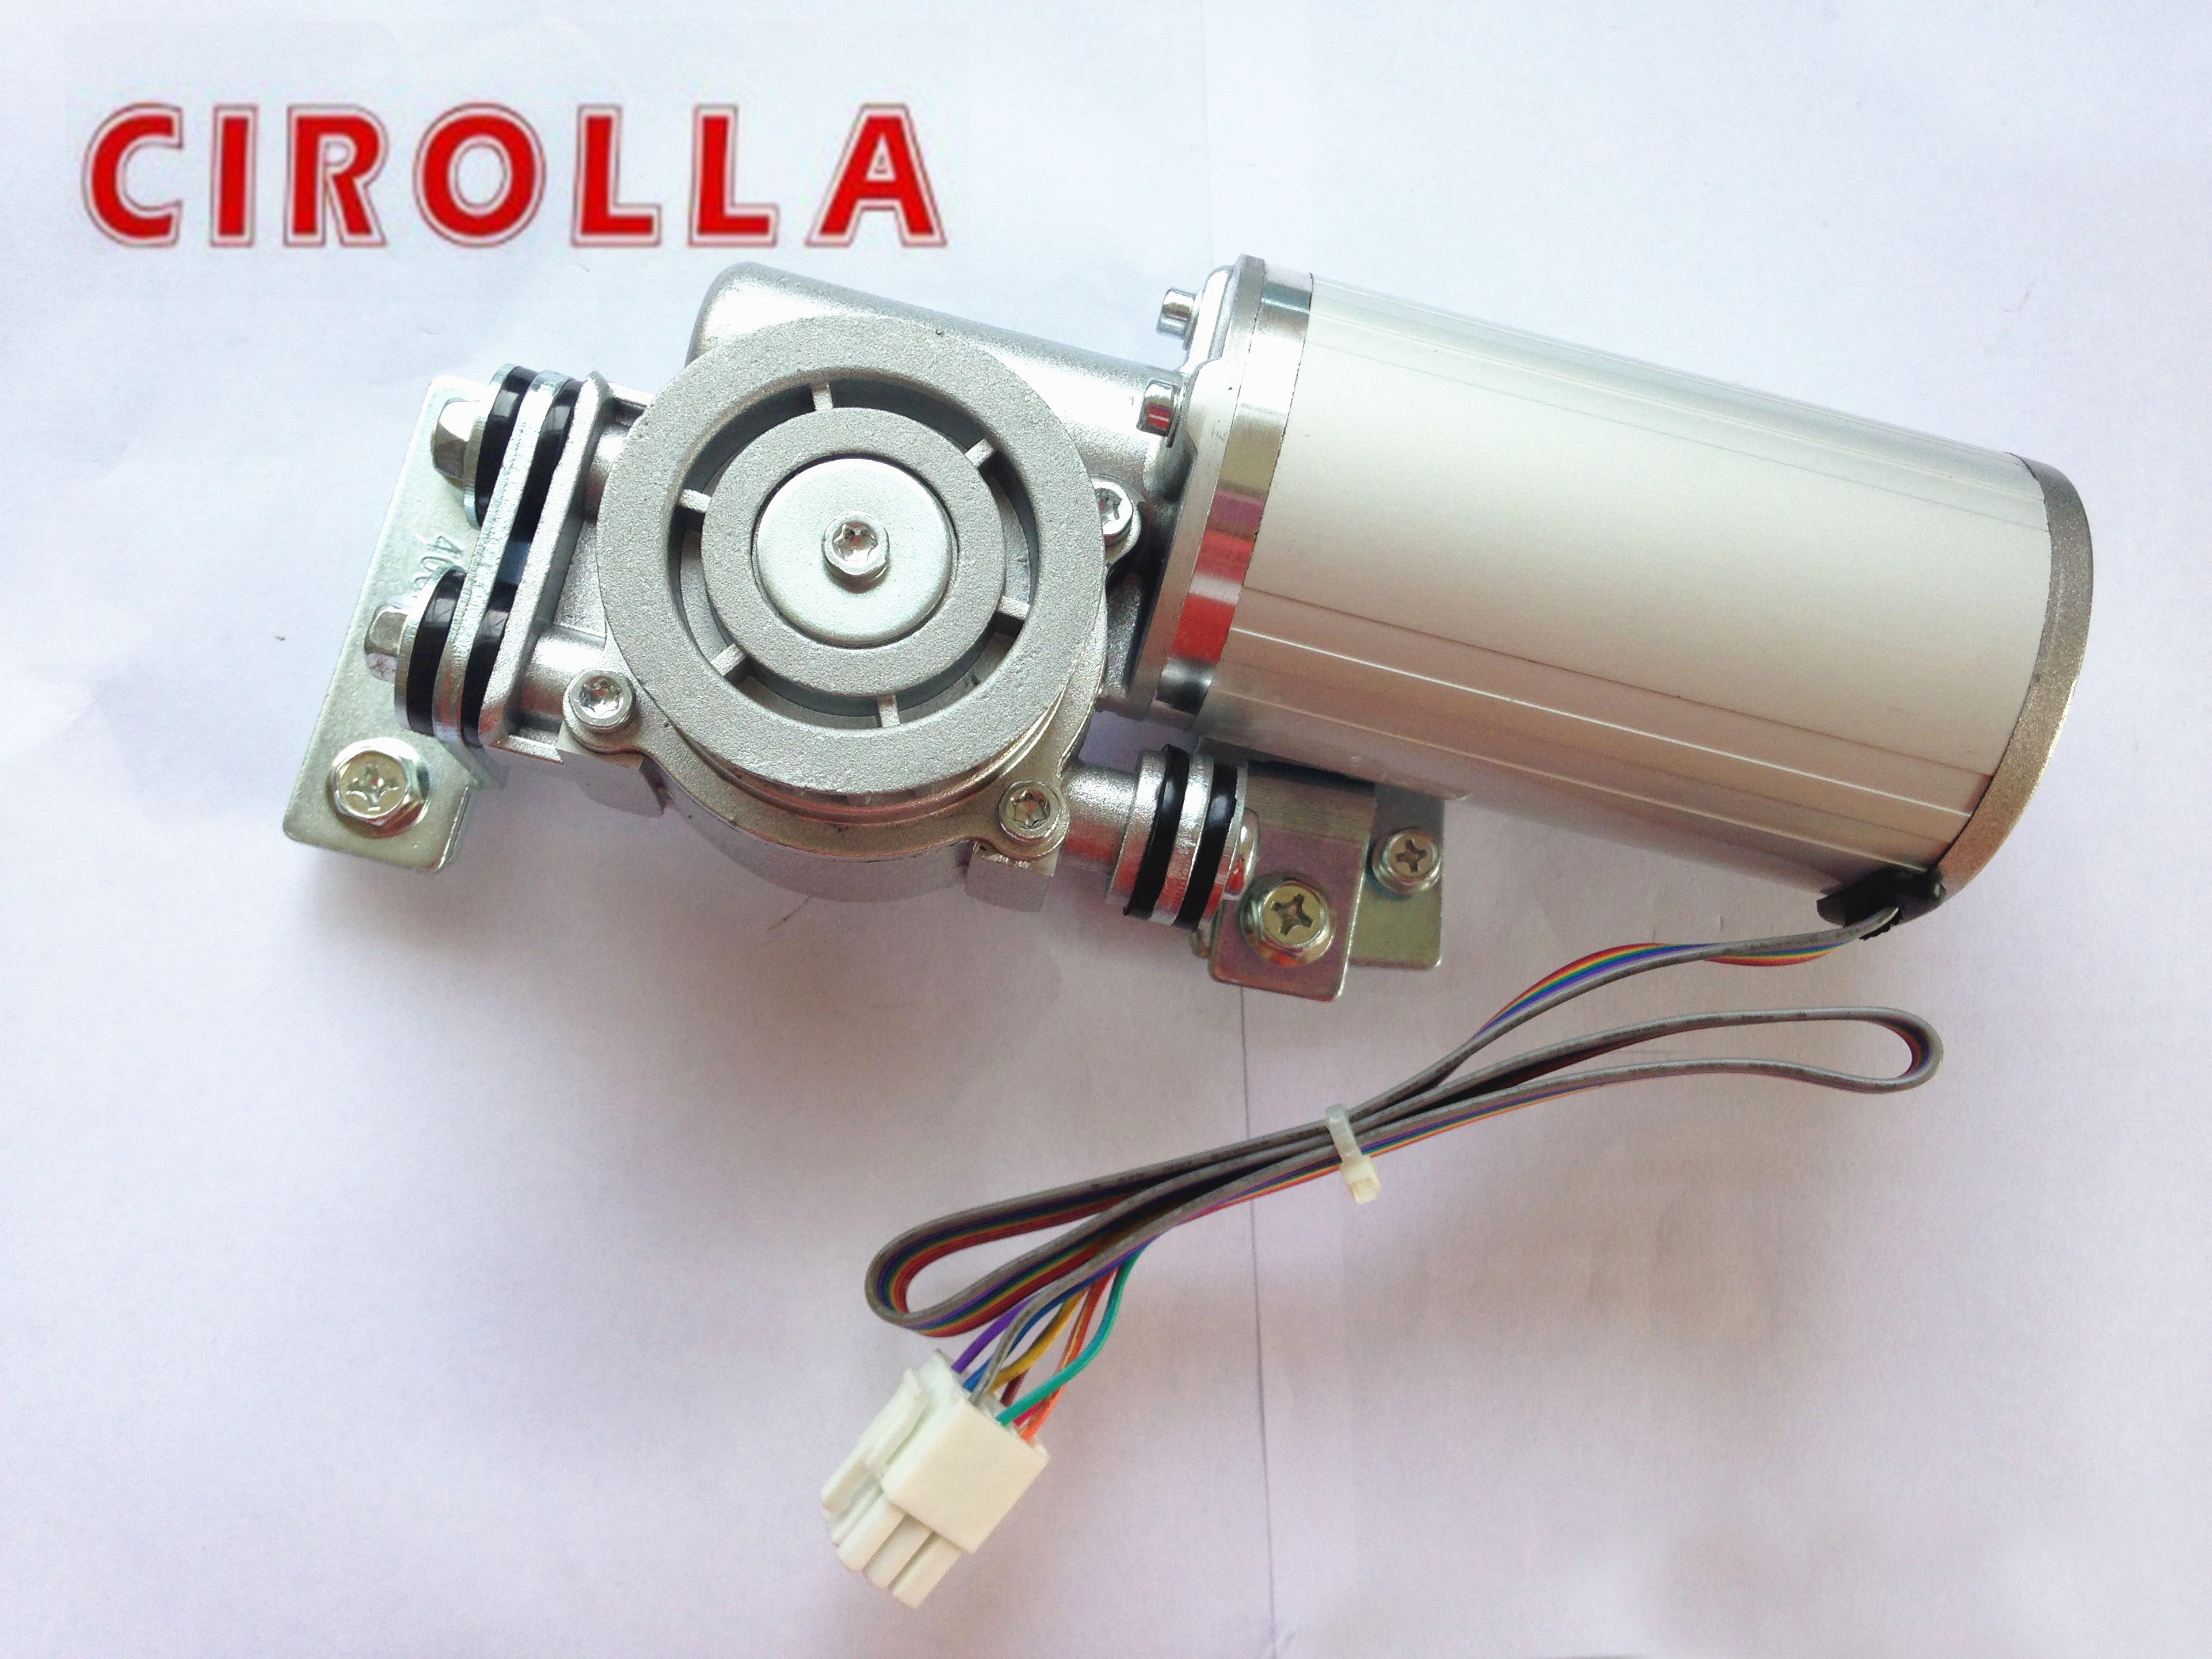  DC 75W Power Sliding Door Motor Closed Half - Open For Commercial Office Building Manufactures